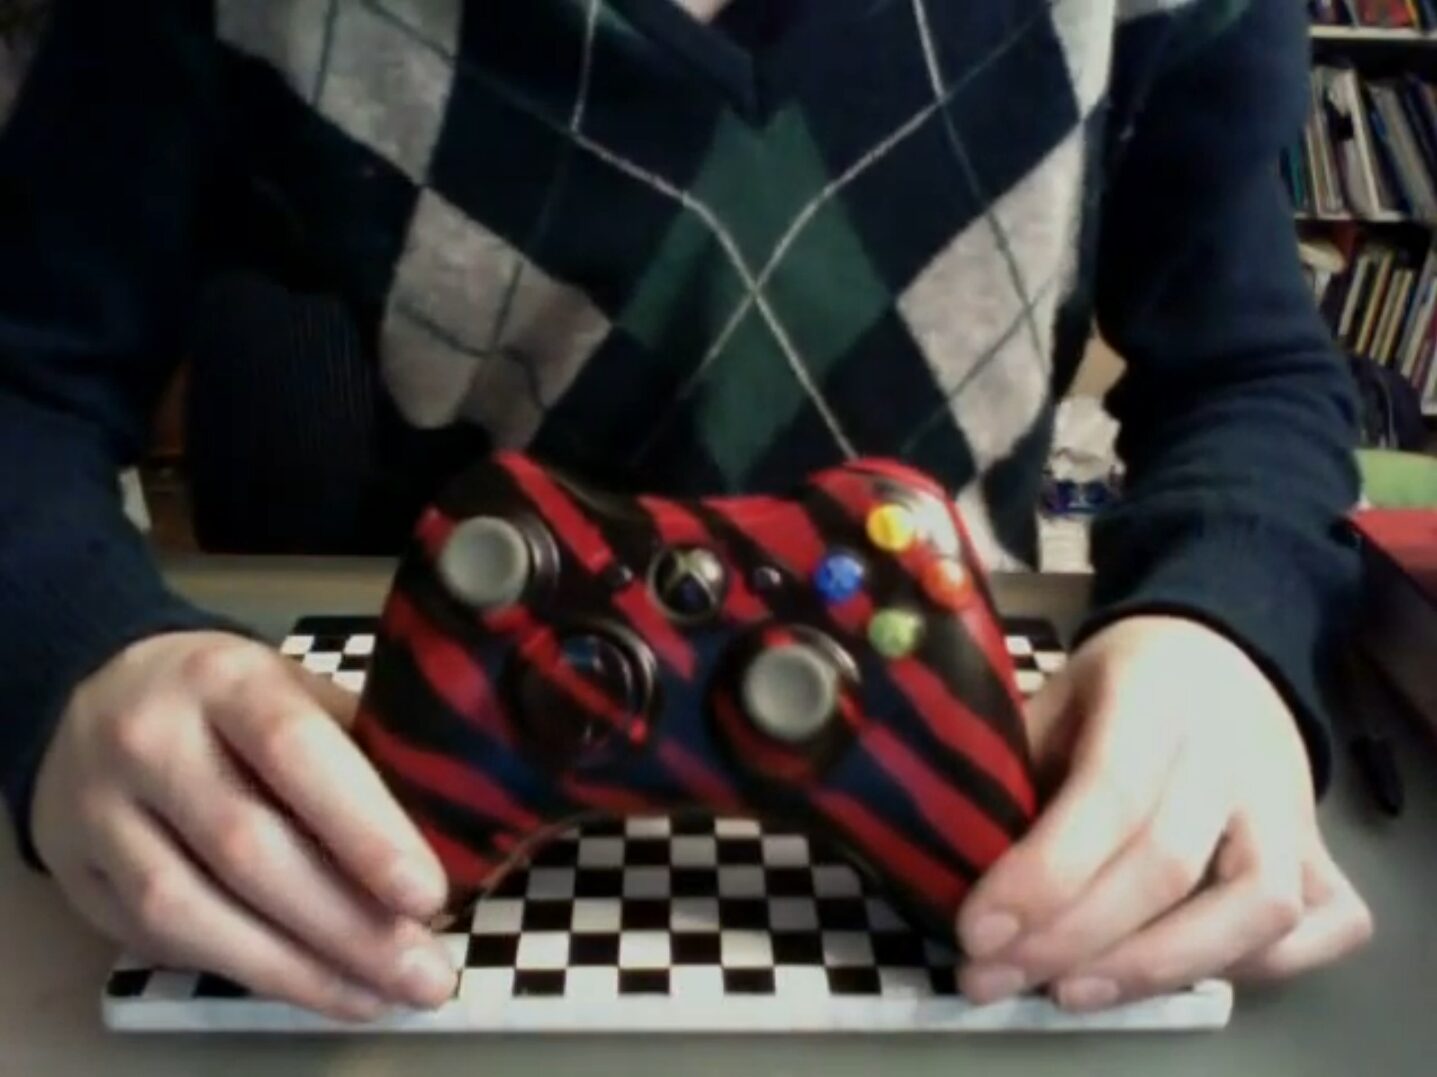 Dune Star Timothée Chalamet Used To Make Xbox 360 Controller Mod Videos On YouTube